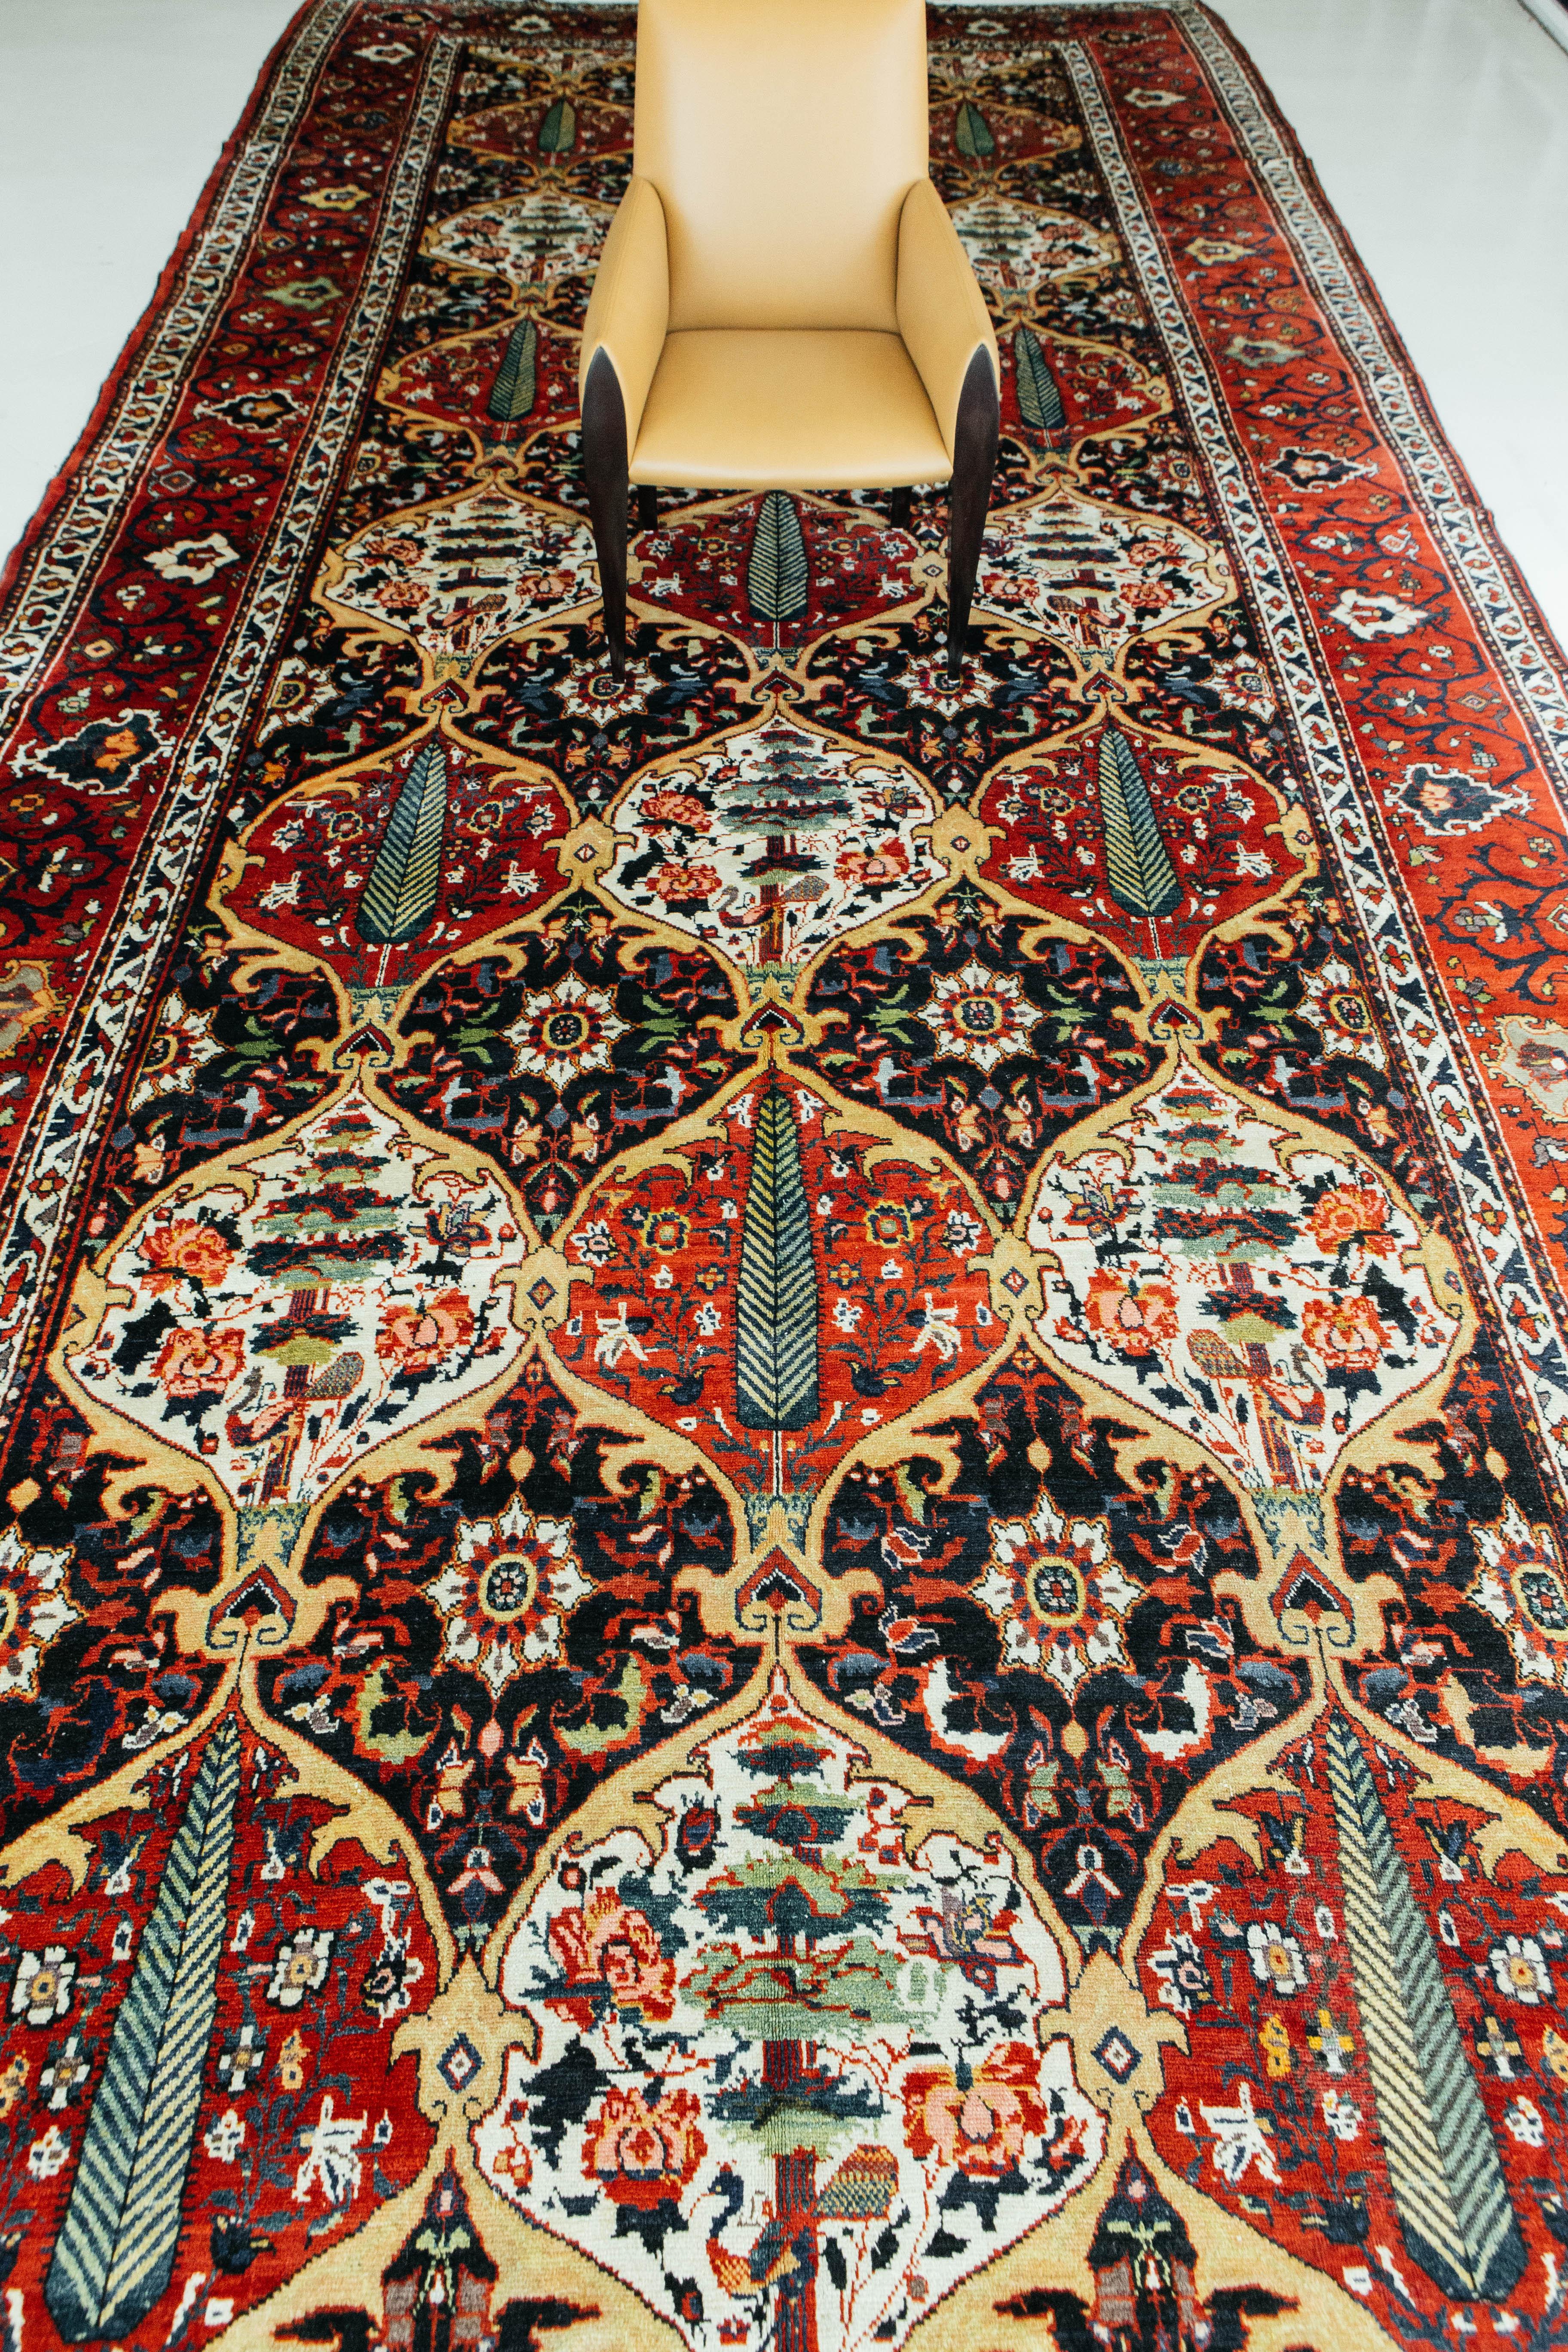 The antique Persian Bahktiari rug is handmade and features an array of colors. The large size of this piece makes it ideal for flooring applications. Add this fine piece of art to your home and collection now. Visit our showroom in Los Angeles, in